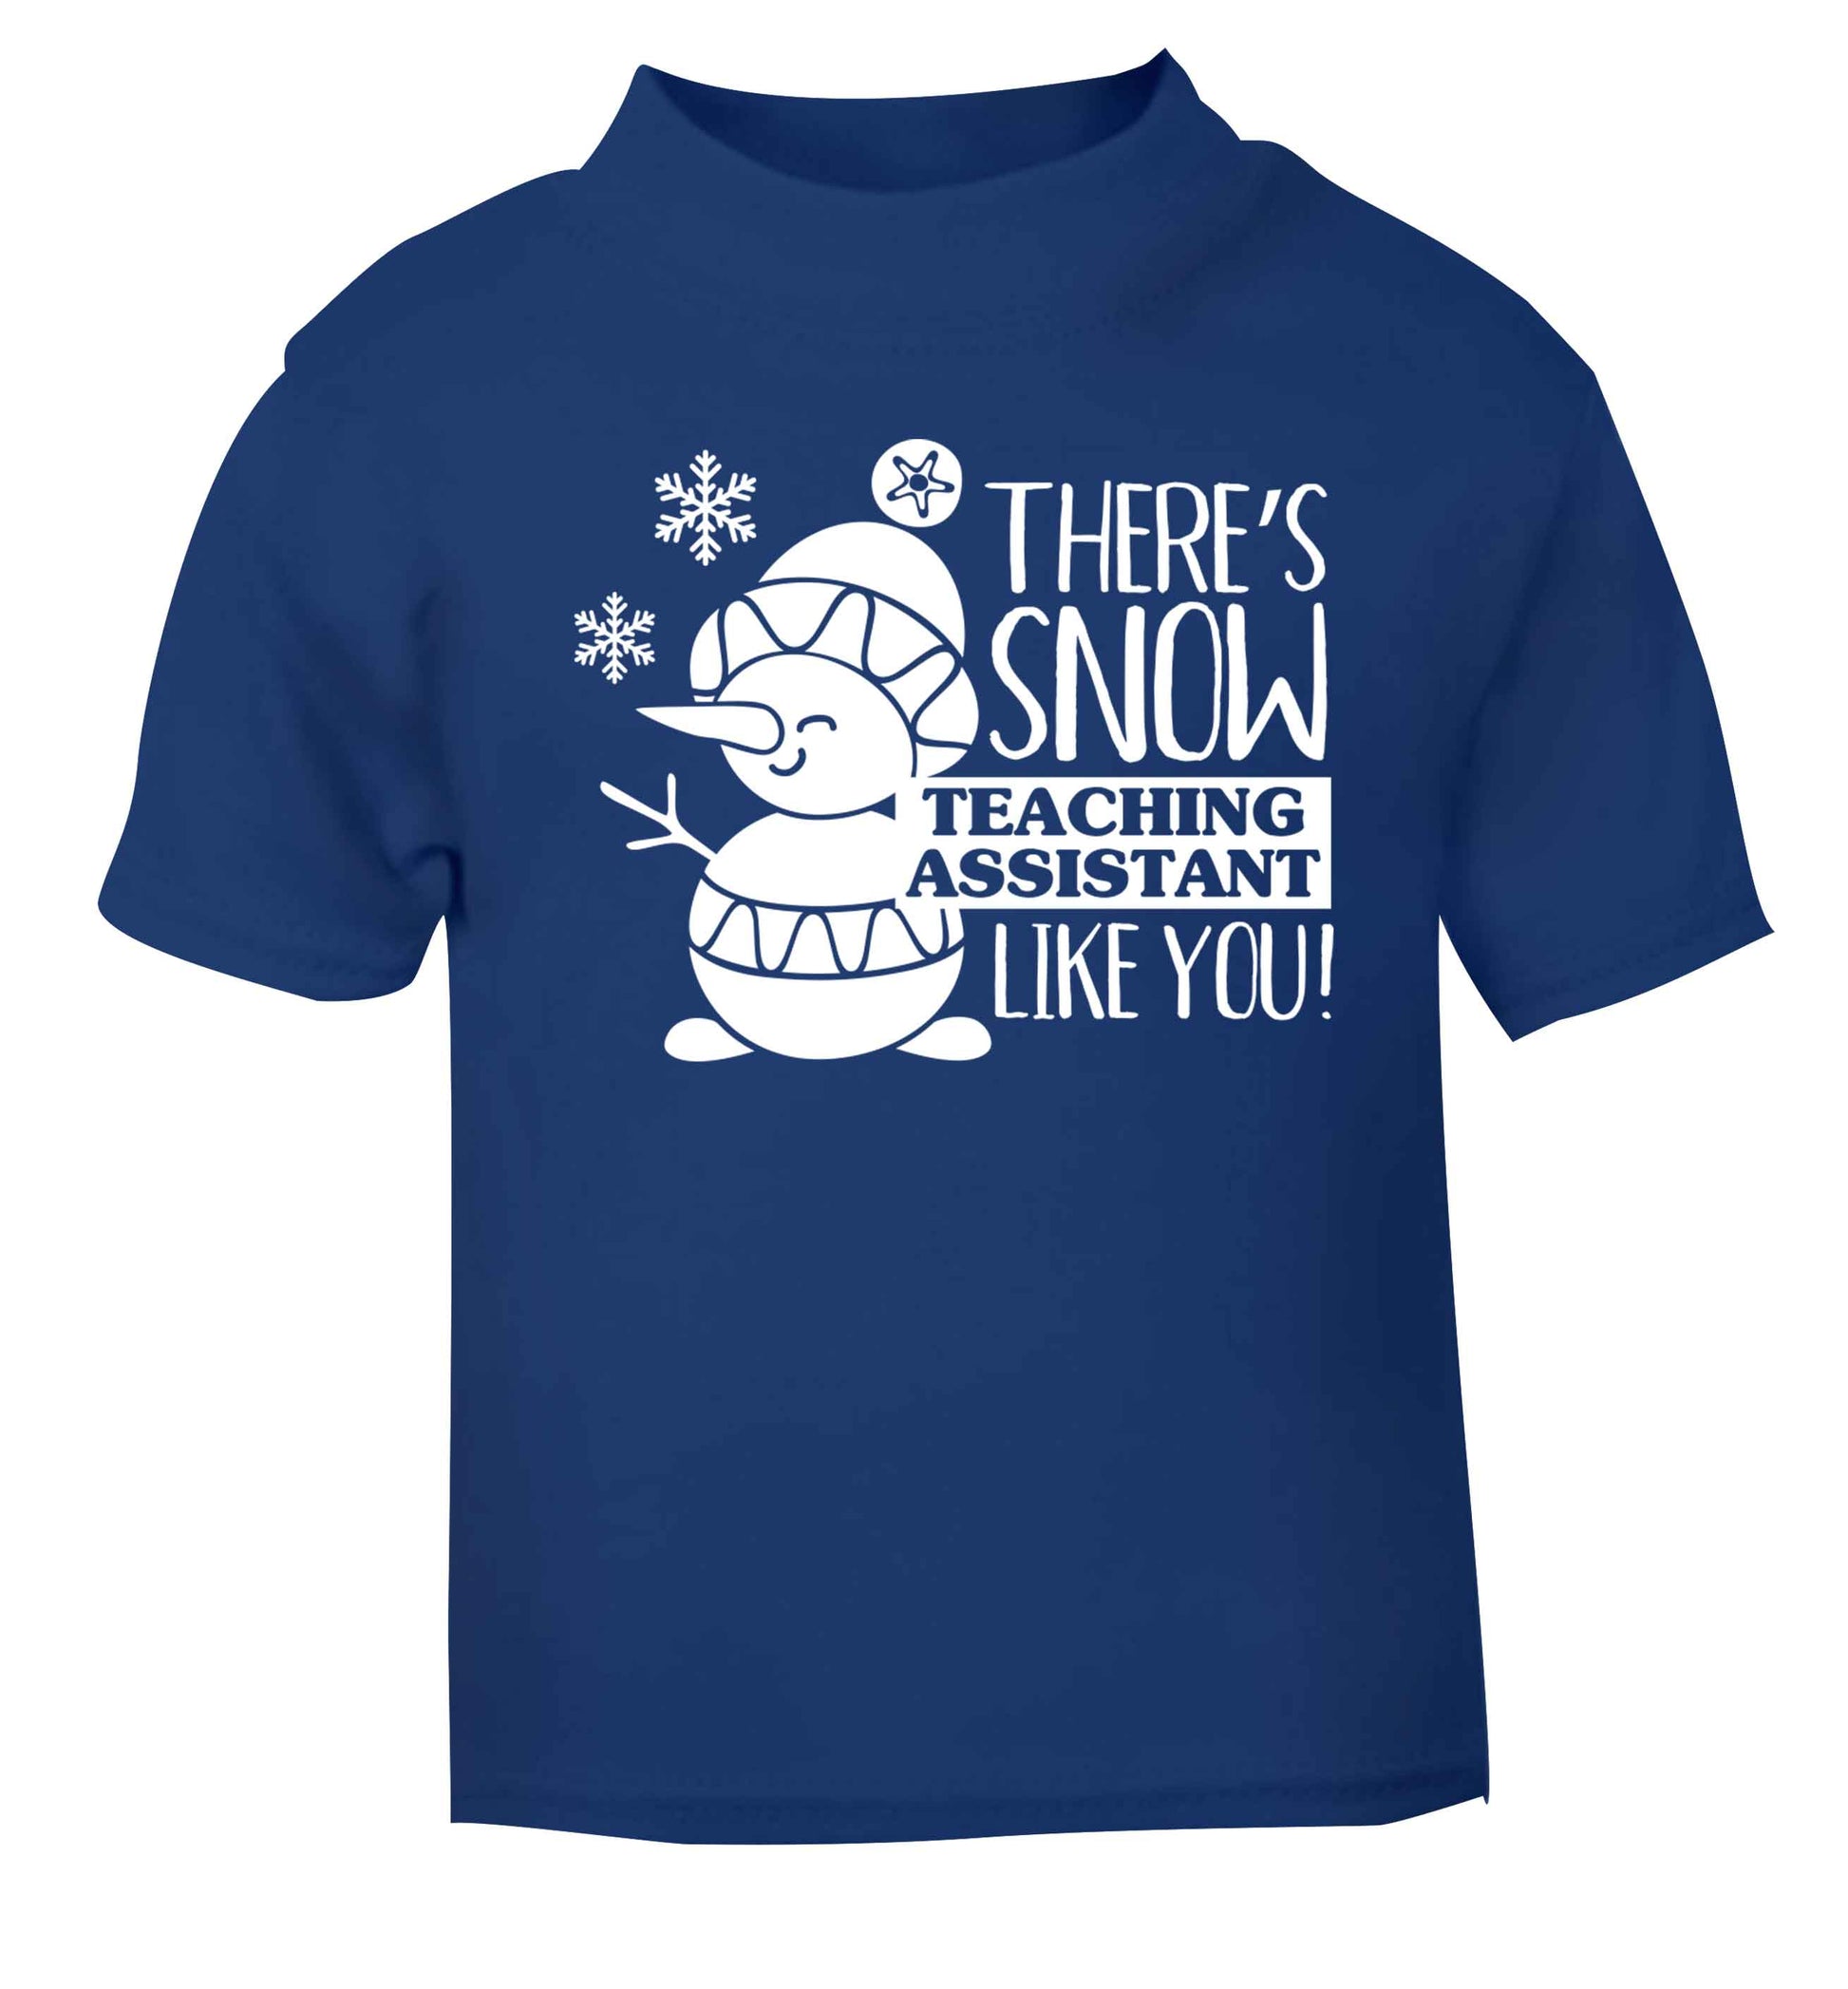 There's snow teaching assistant like you blue baby toddler Tshirt 2 Years